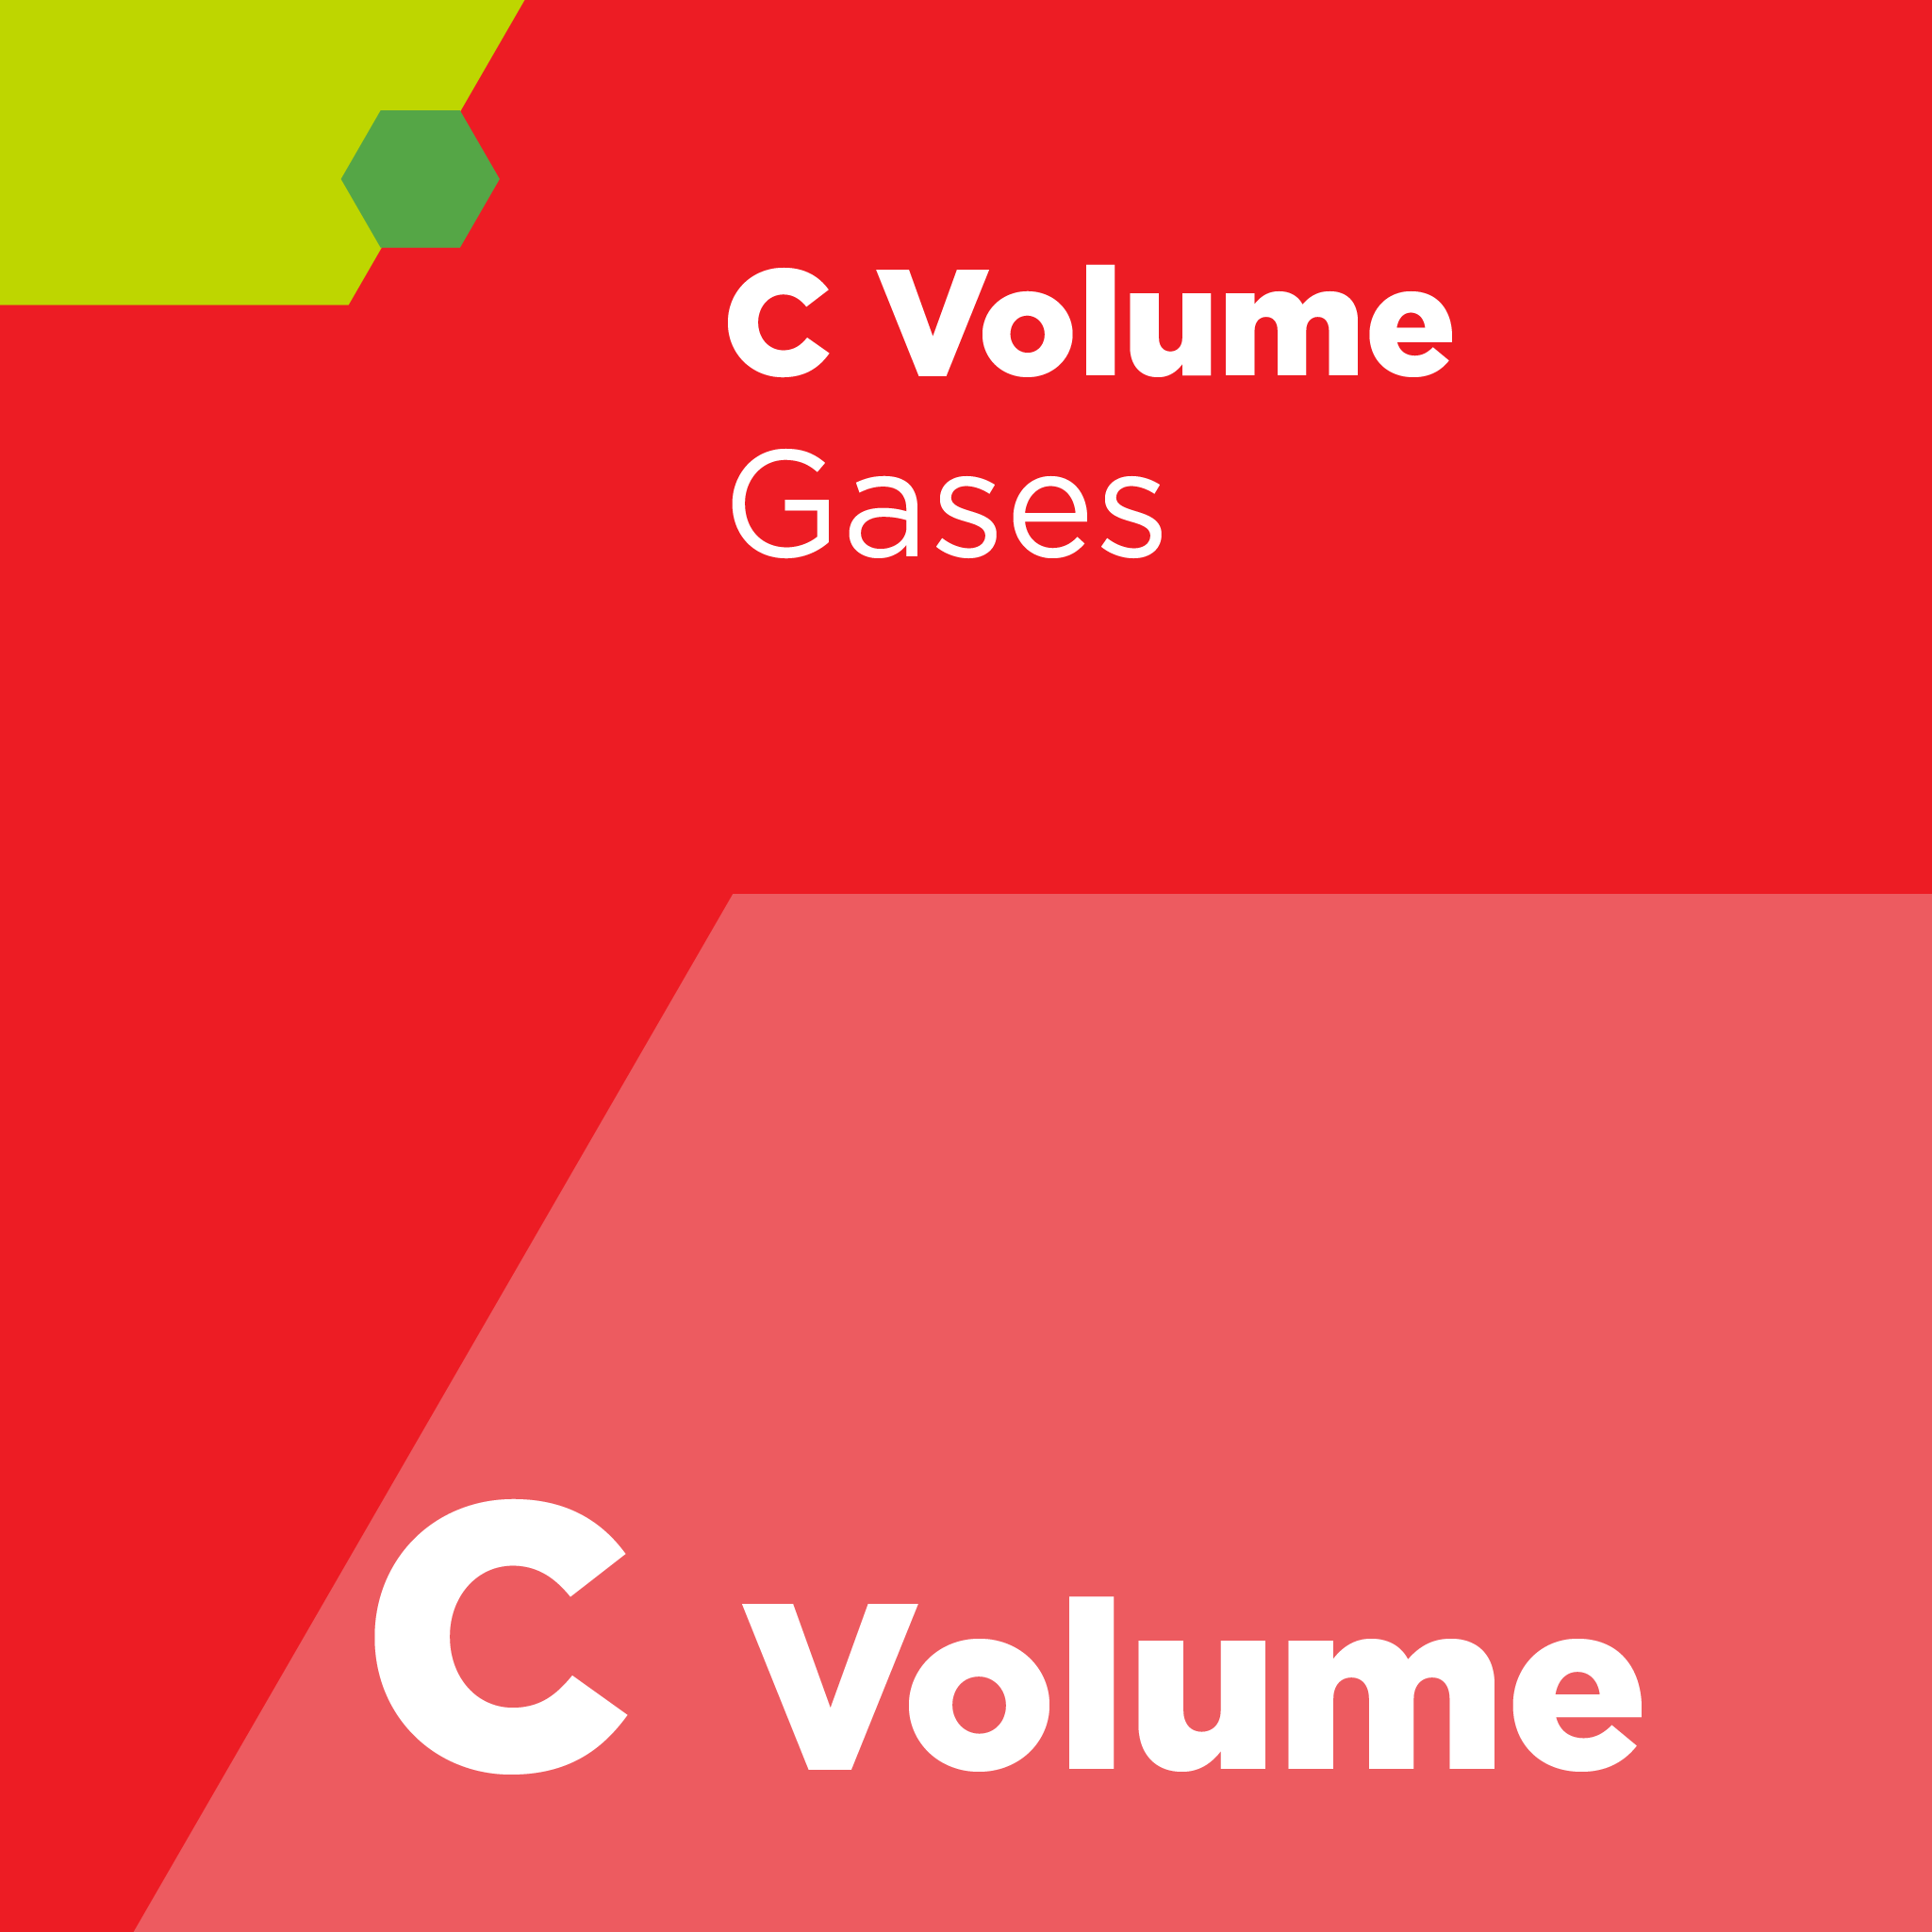 C00300 - SEMI C3 - Specification for Gases